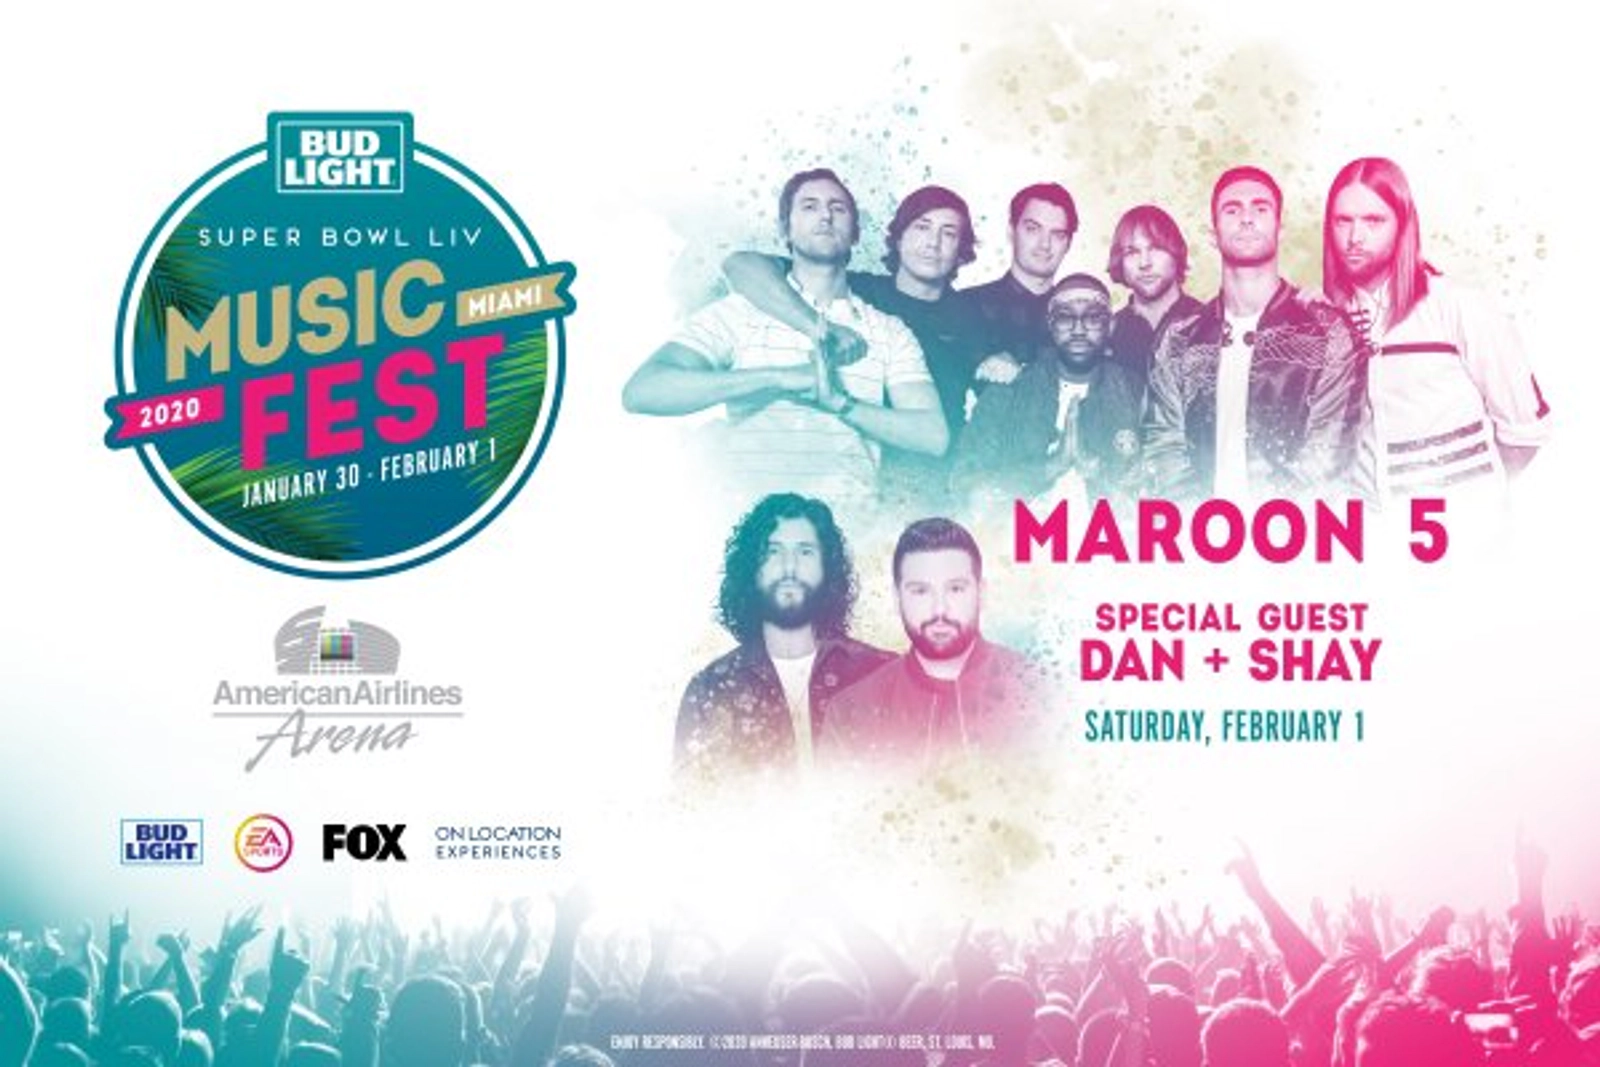 Bud Light Super Bowl Music Fest with Maroon 5! - Thumbnail Image